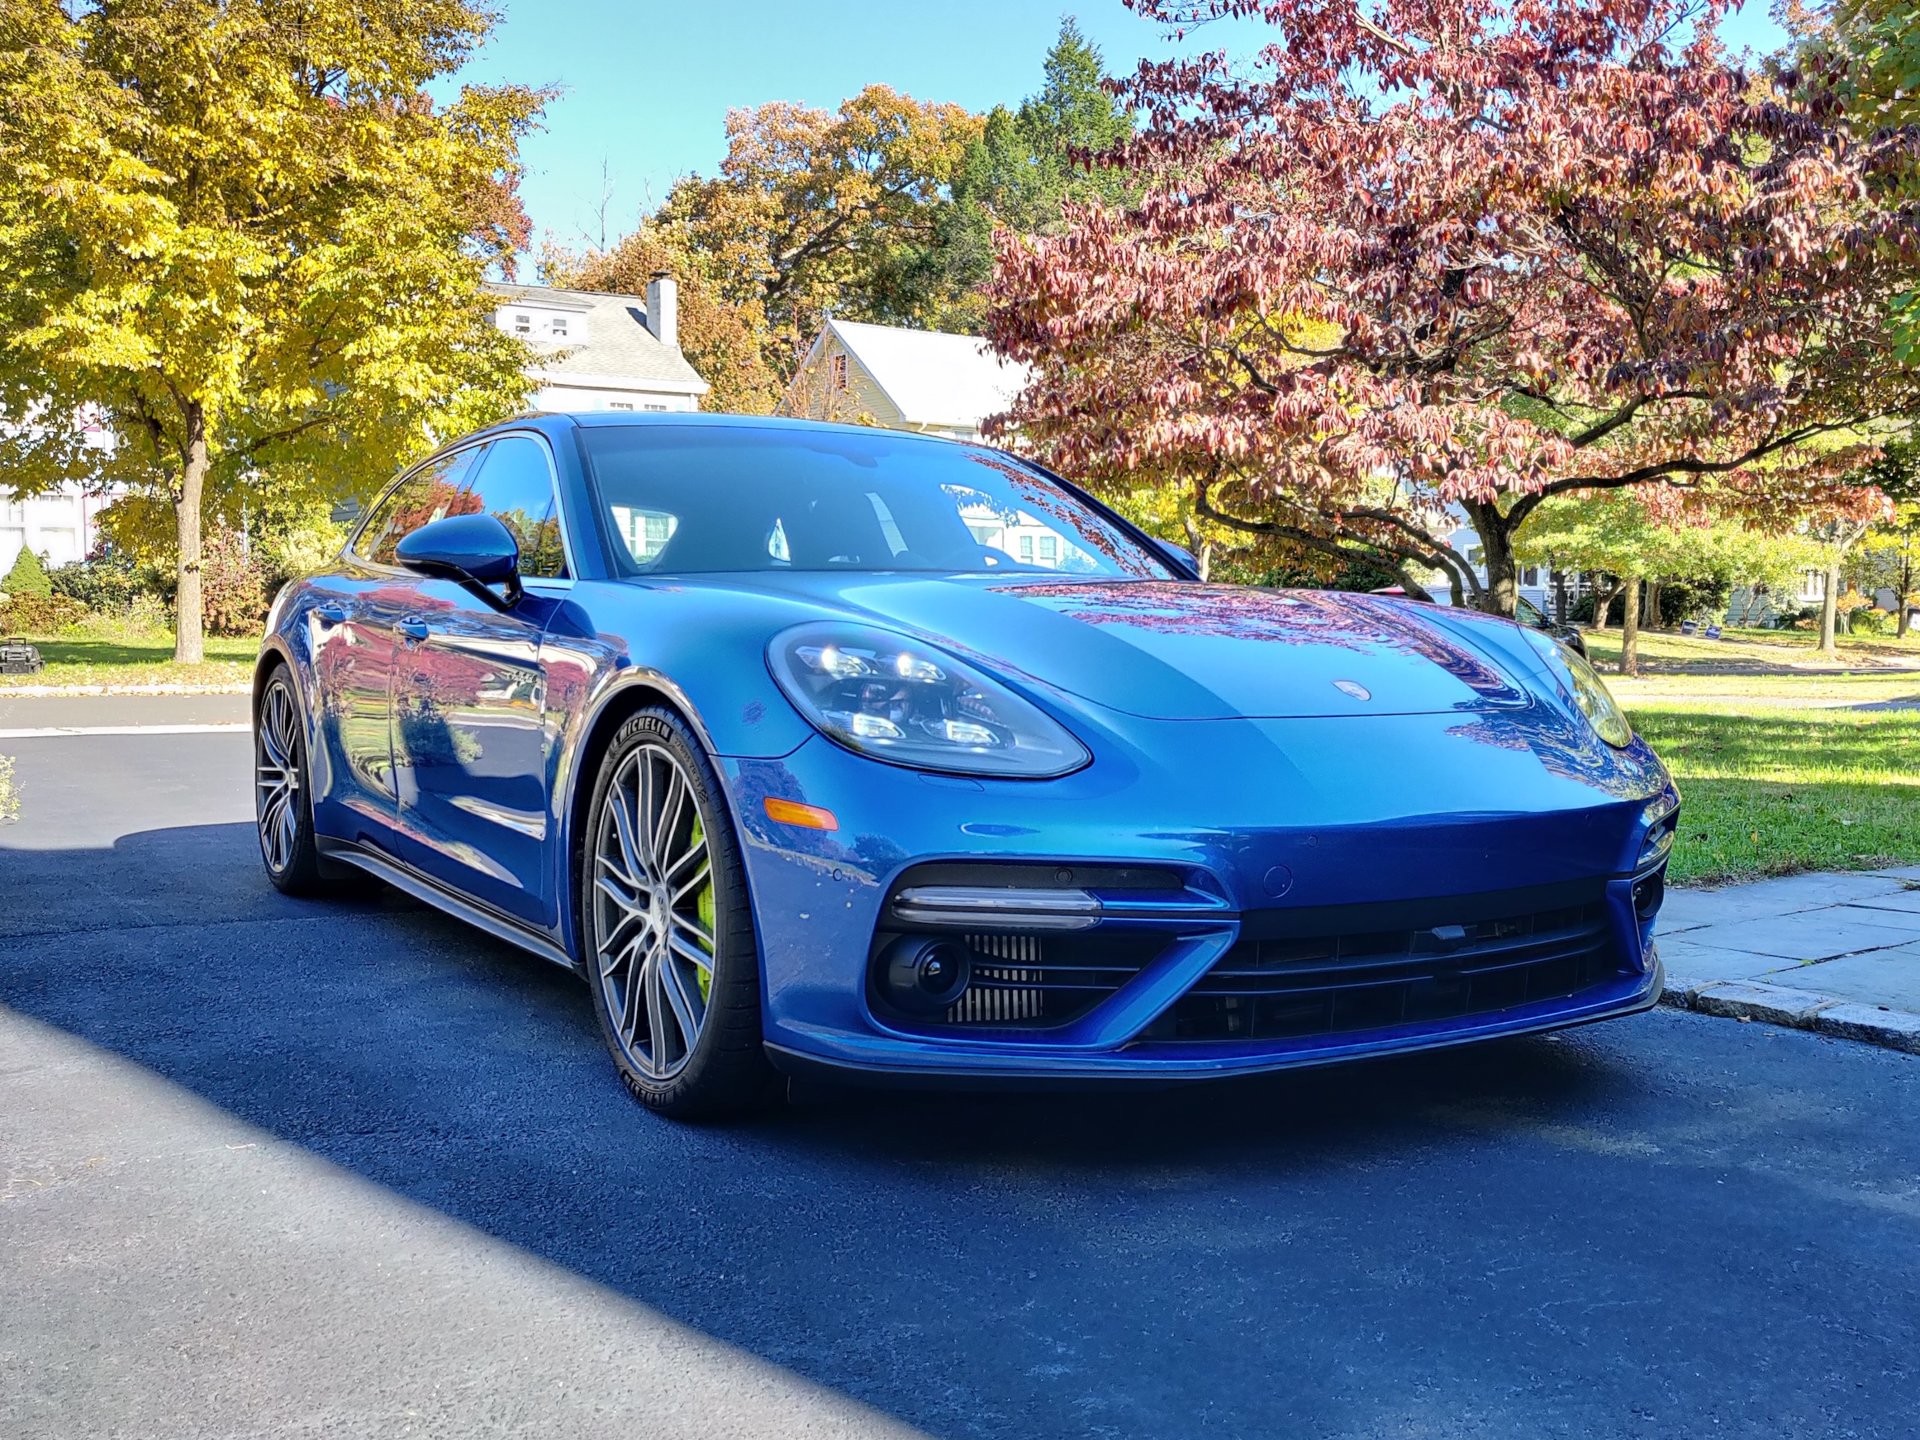 The test-drive Porsche Panamera Turbo S E-Hybrid Sport Turismo, which cost US$210,000, can reach a top speed of 192mph. Photo: Benjamin Zhang